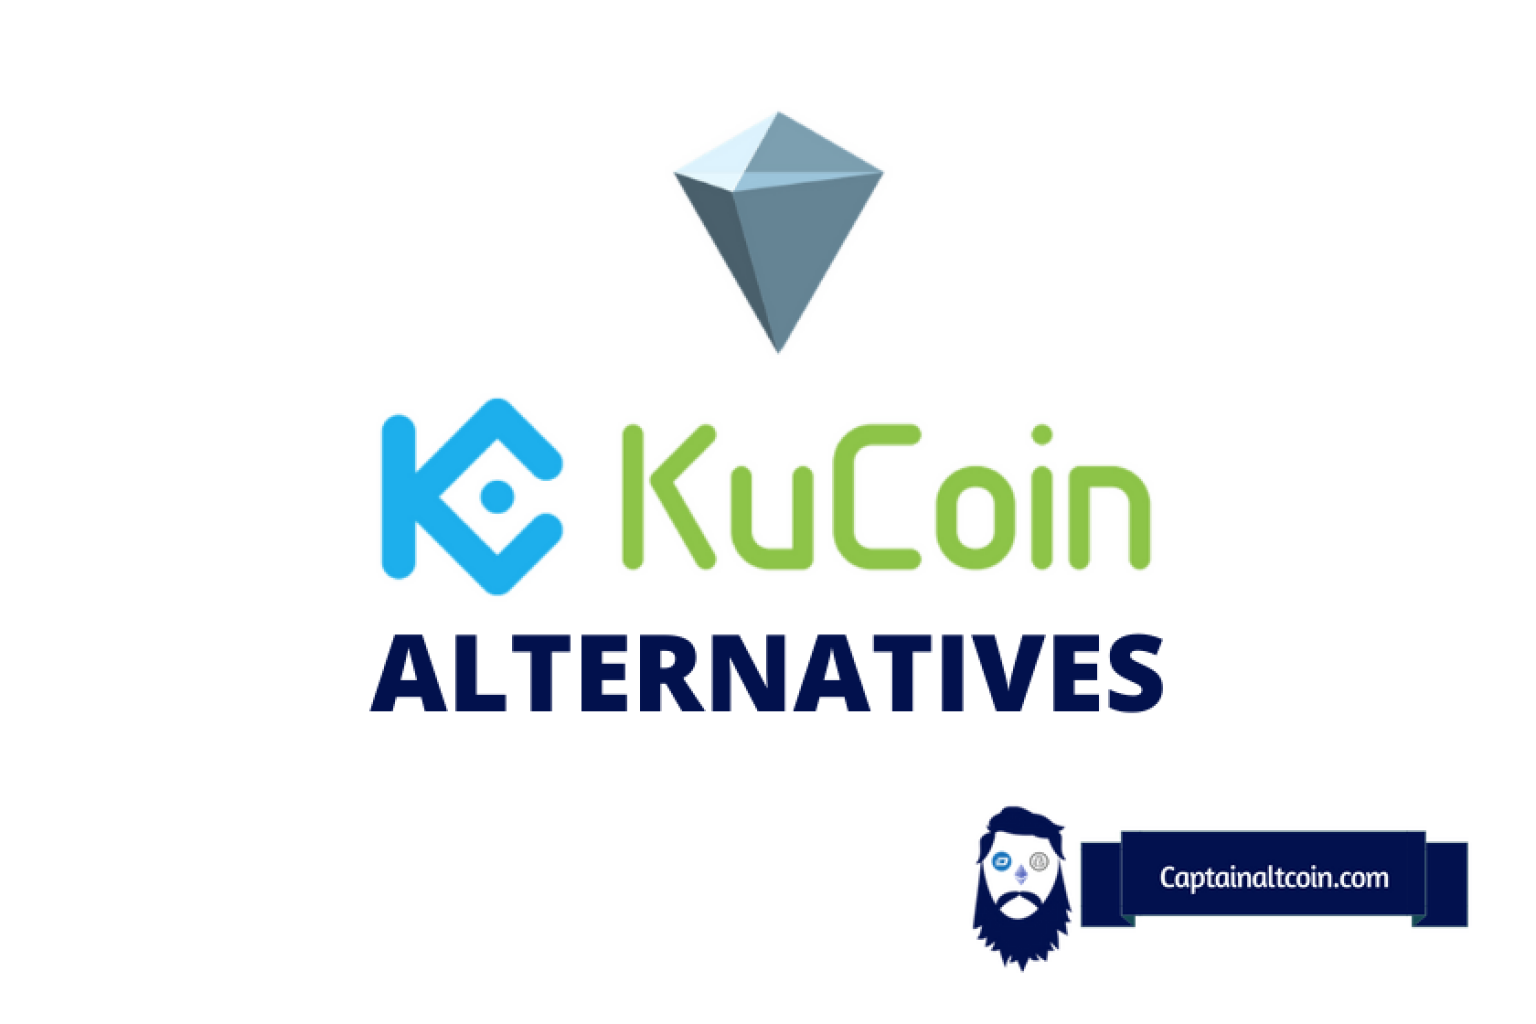 assets other than kucoin shares